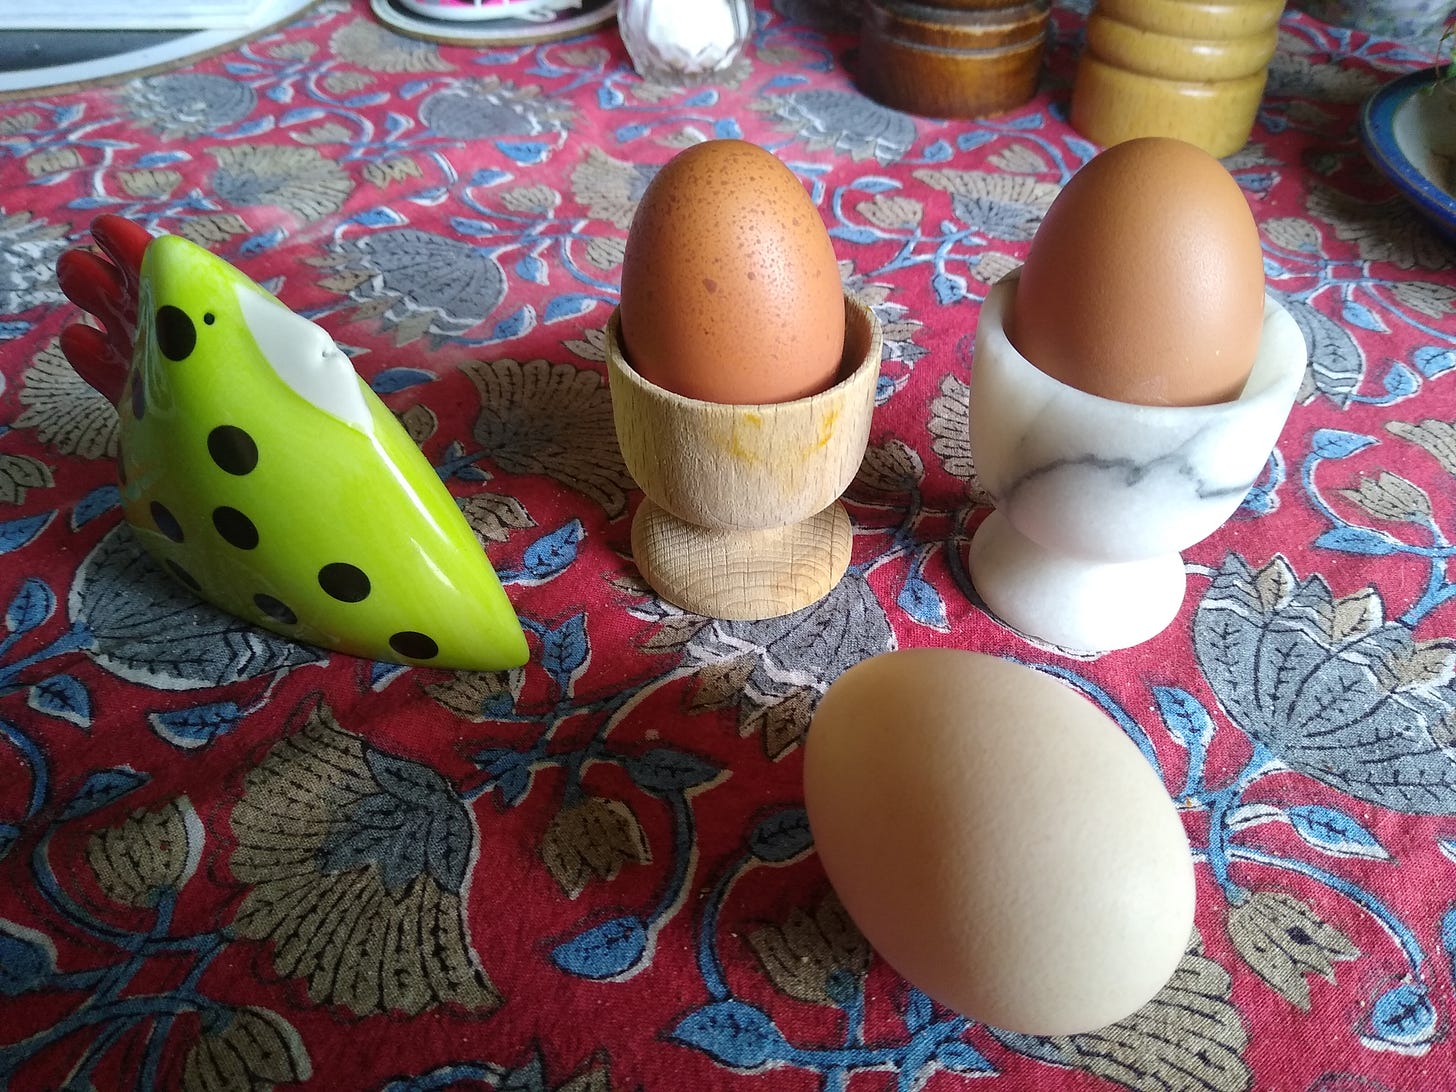 A photograph of three eggs and a salt shaker in the shape of a green spotty bird.